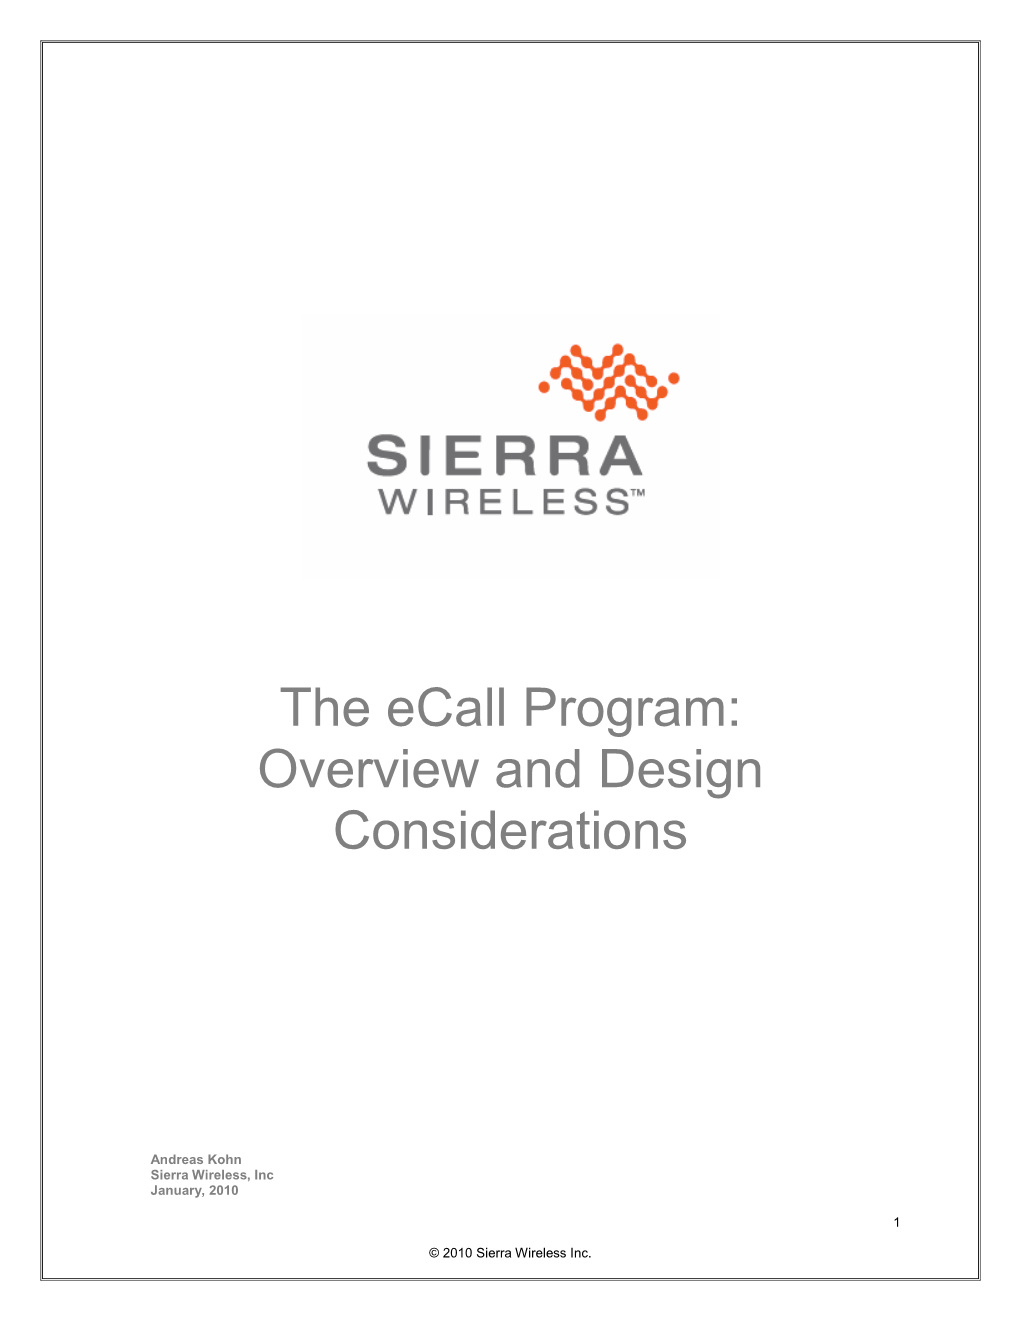 The Ecall Program: Overview and Design